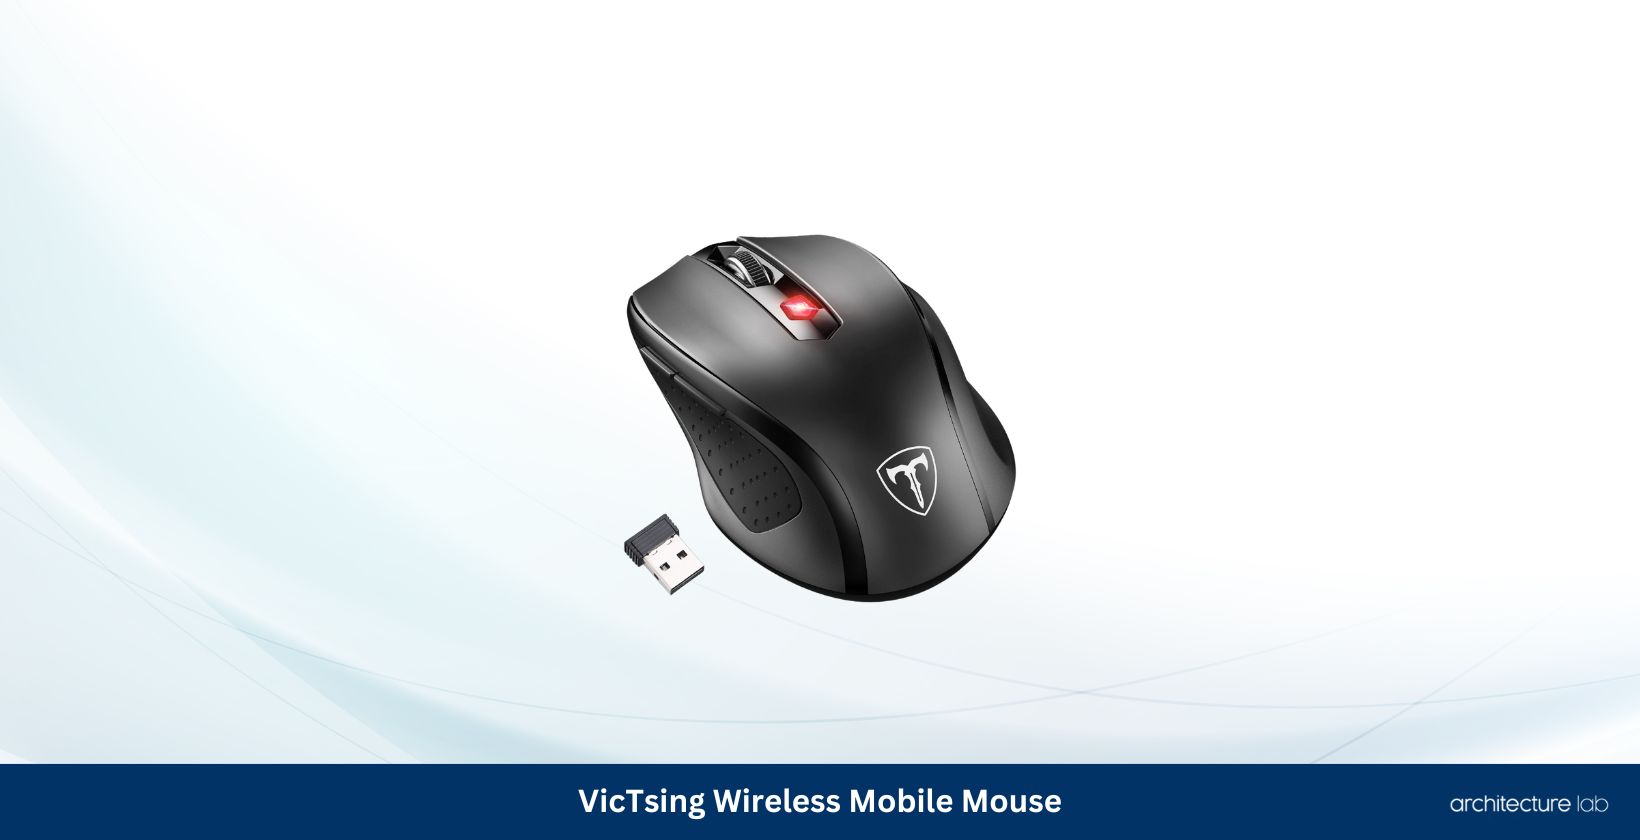 Victsing wireless mobile mouse